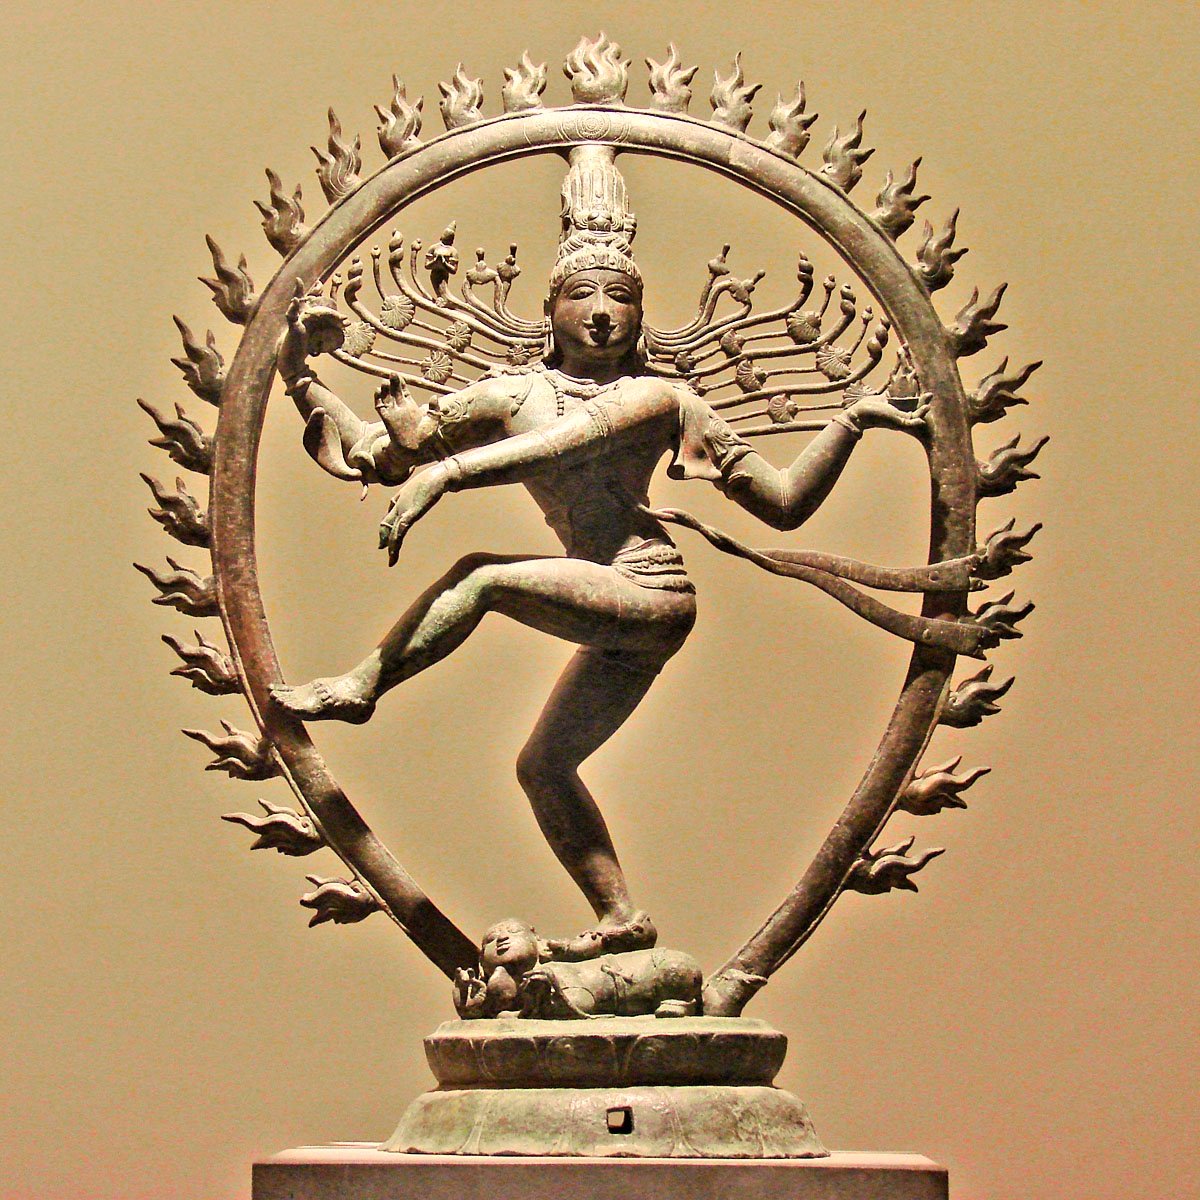 a statue in the shape of a dancing man